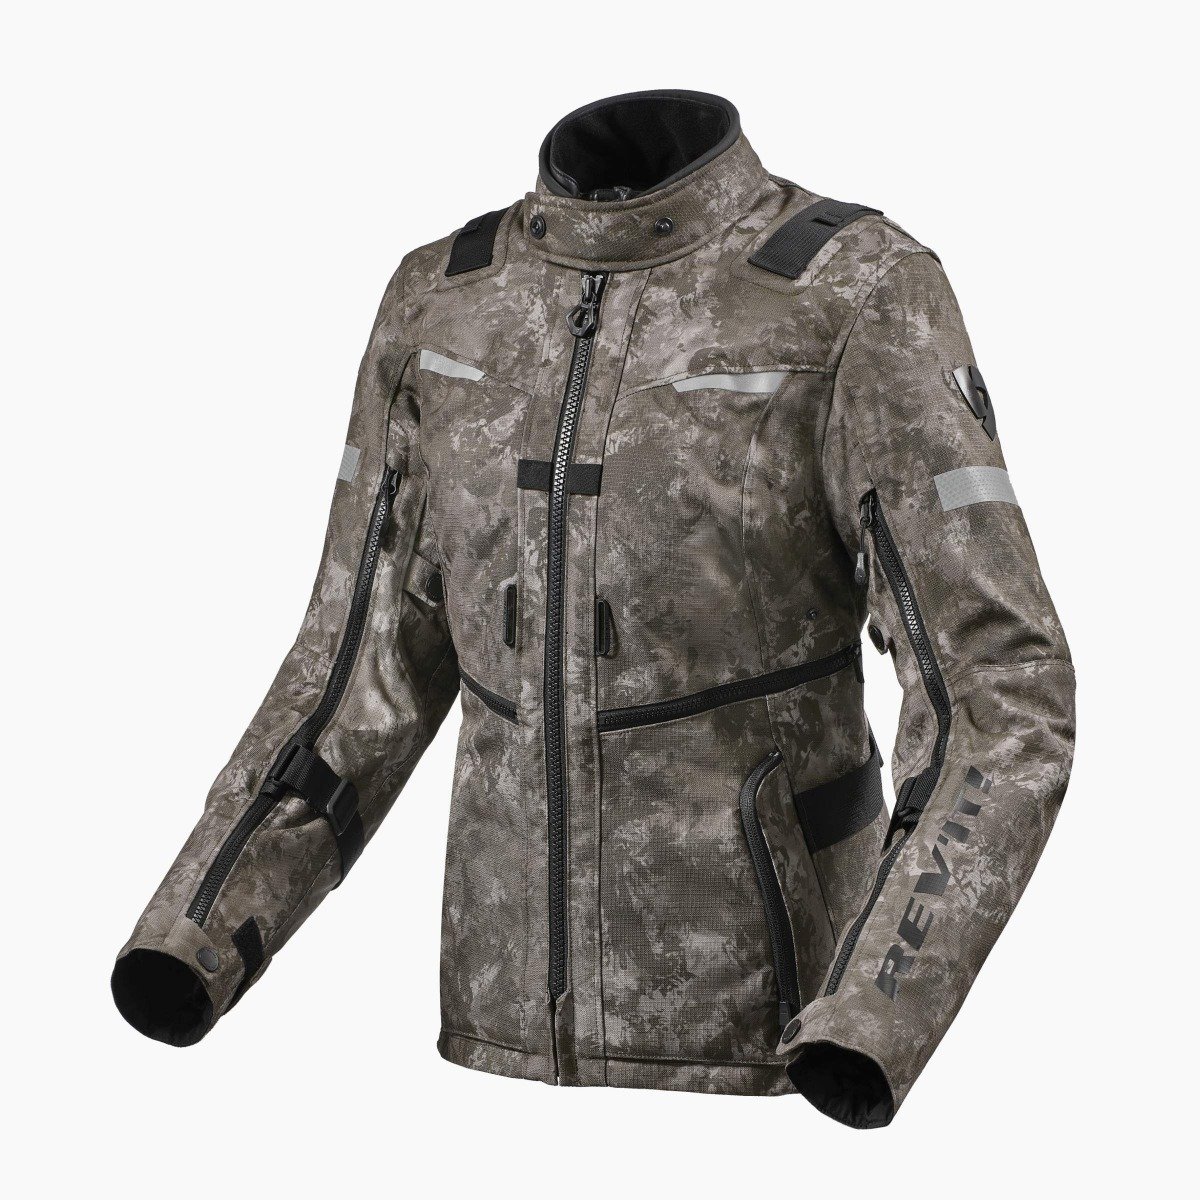 Image of REV'IT! Sand 4 H2O Jacket Lady Camo Brown Size 40 ID 8700001311625